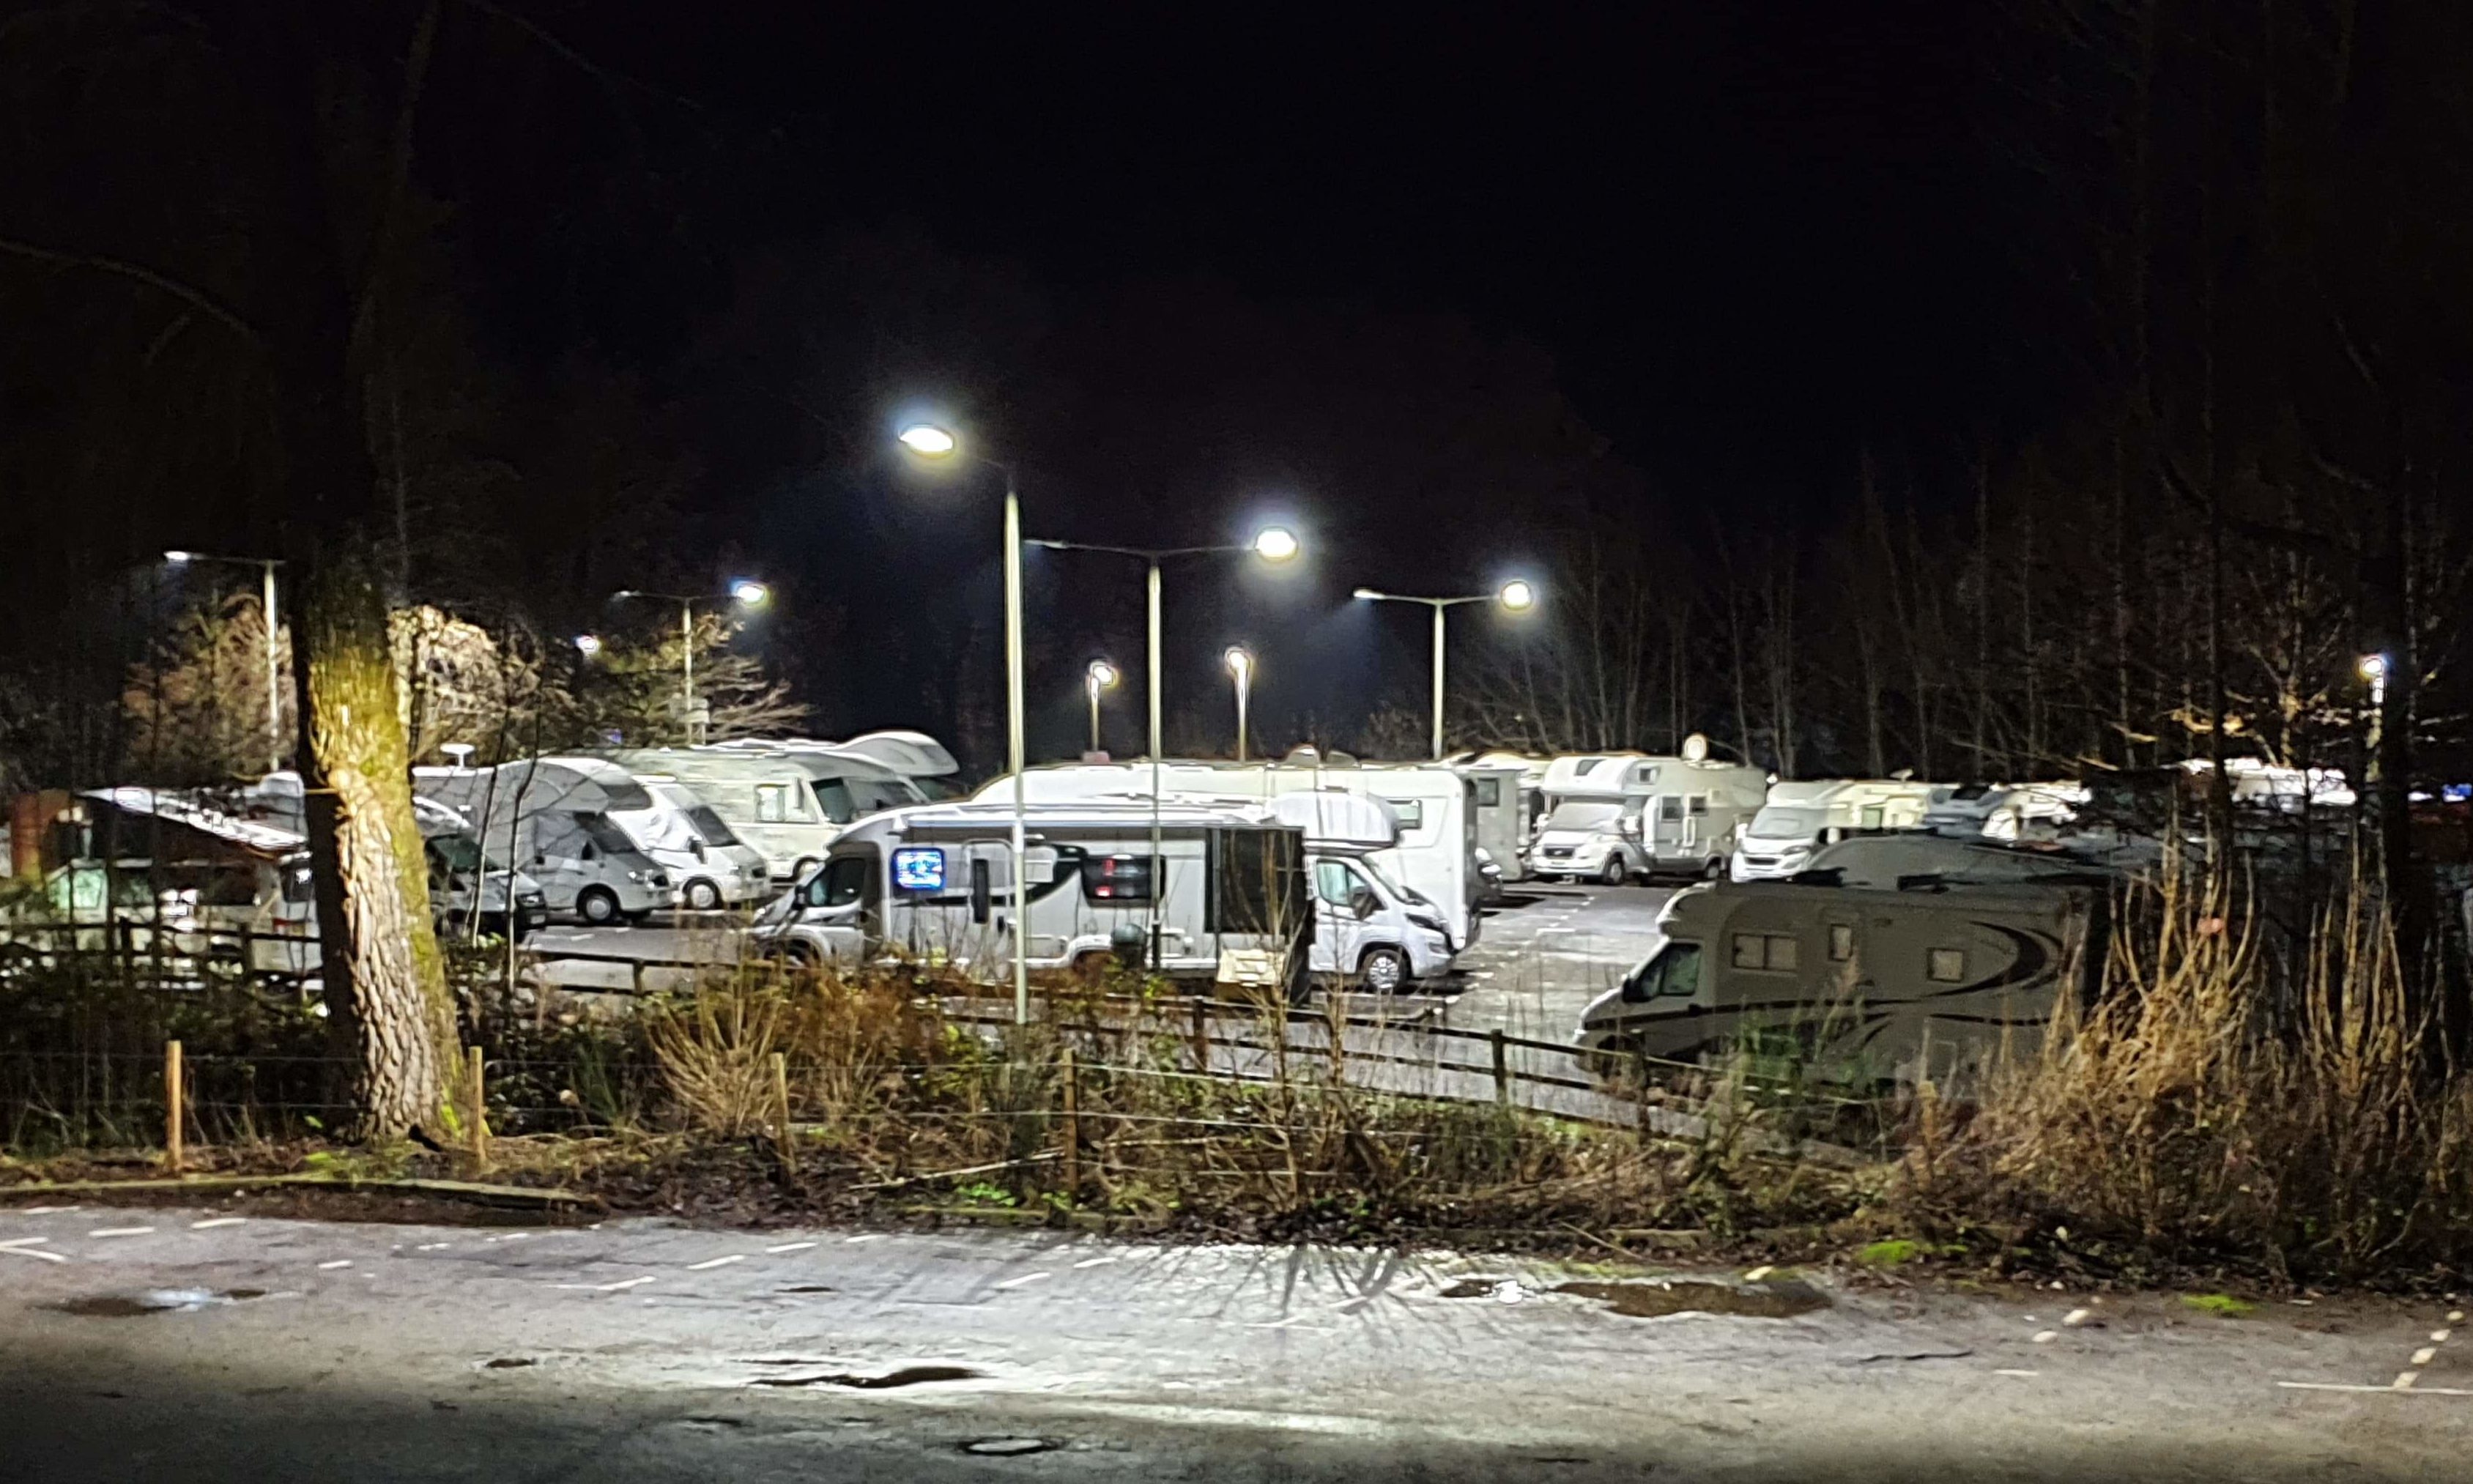 Caravans crammed into Pitlochry's Ferry Road car park.